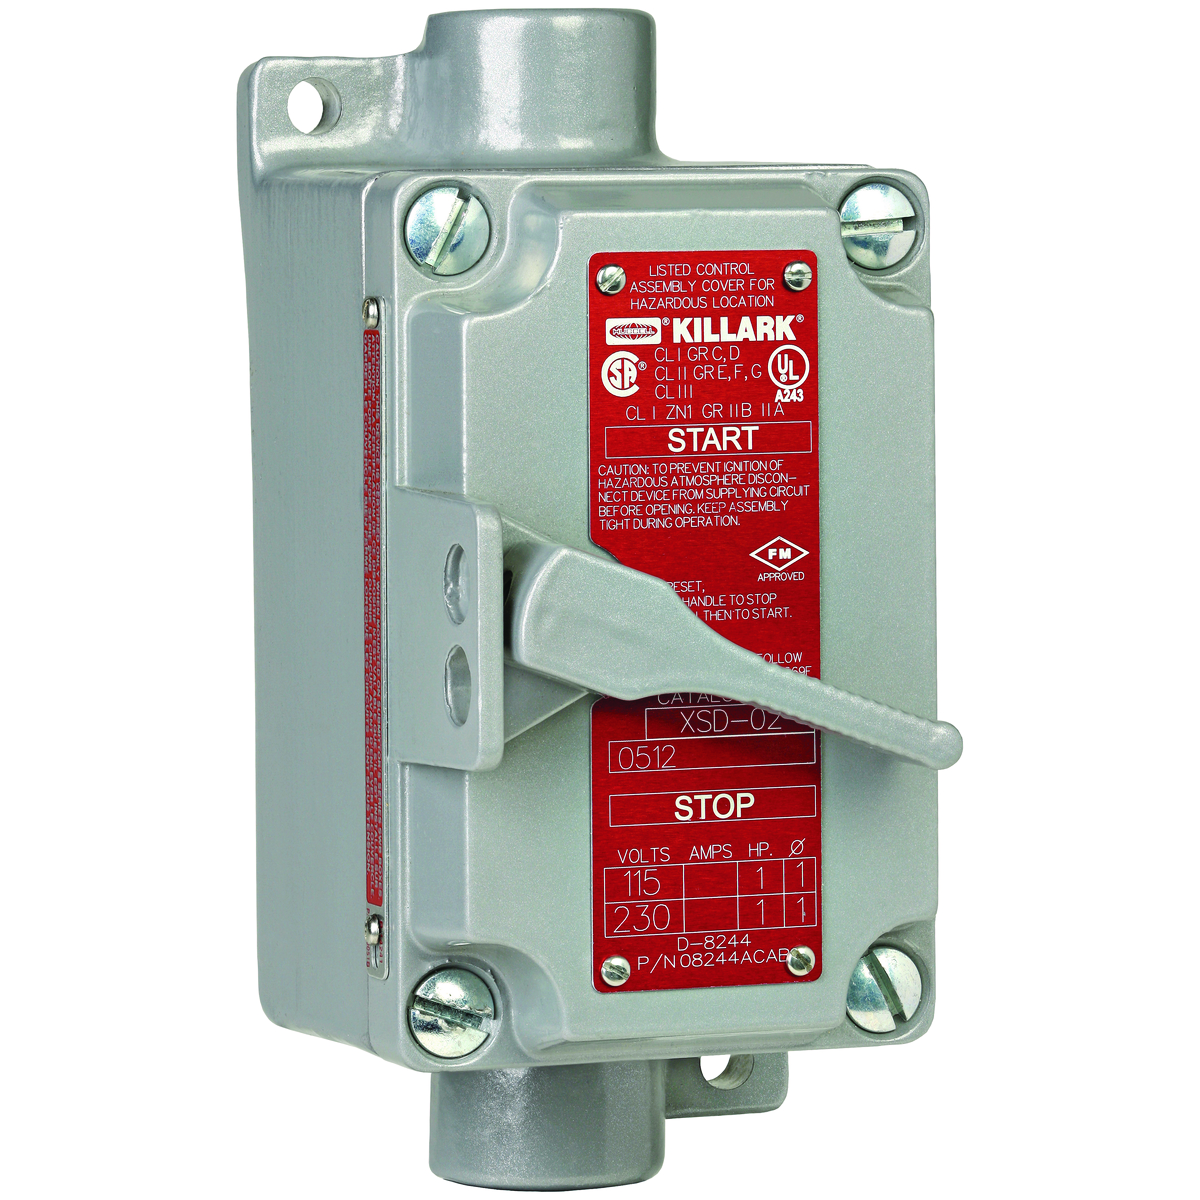 XSX SERIES - ALUMINUM DEAD-END SINGLE GANG 2-POLE, SINGLE PHASE MANUALMOTOR STARTING SWITCH UNIT - WITHOUT OVERLOAD PROTECTION - HUB SIZE 3/4INCH